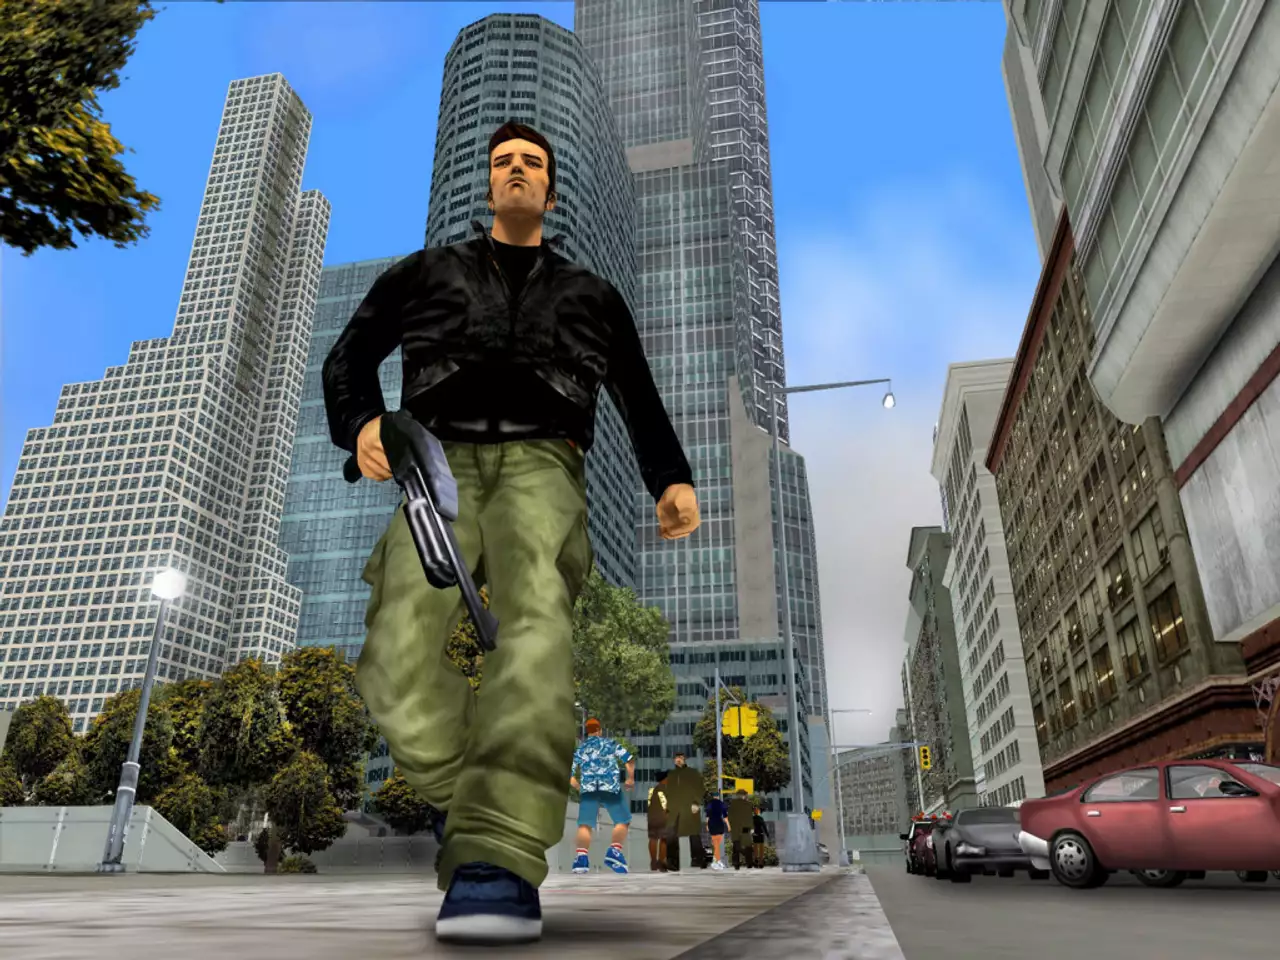 GTA 3 body armor guide - Where to find body armor and how to use